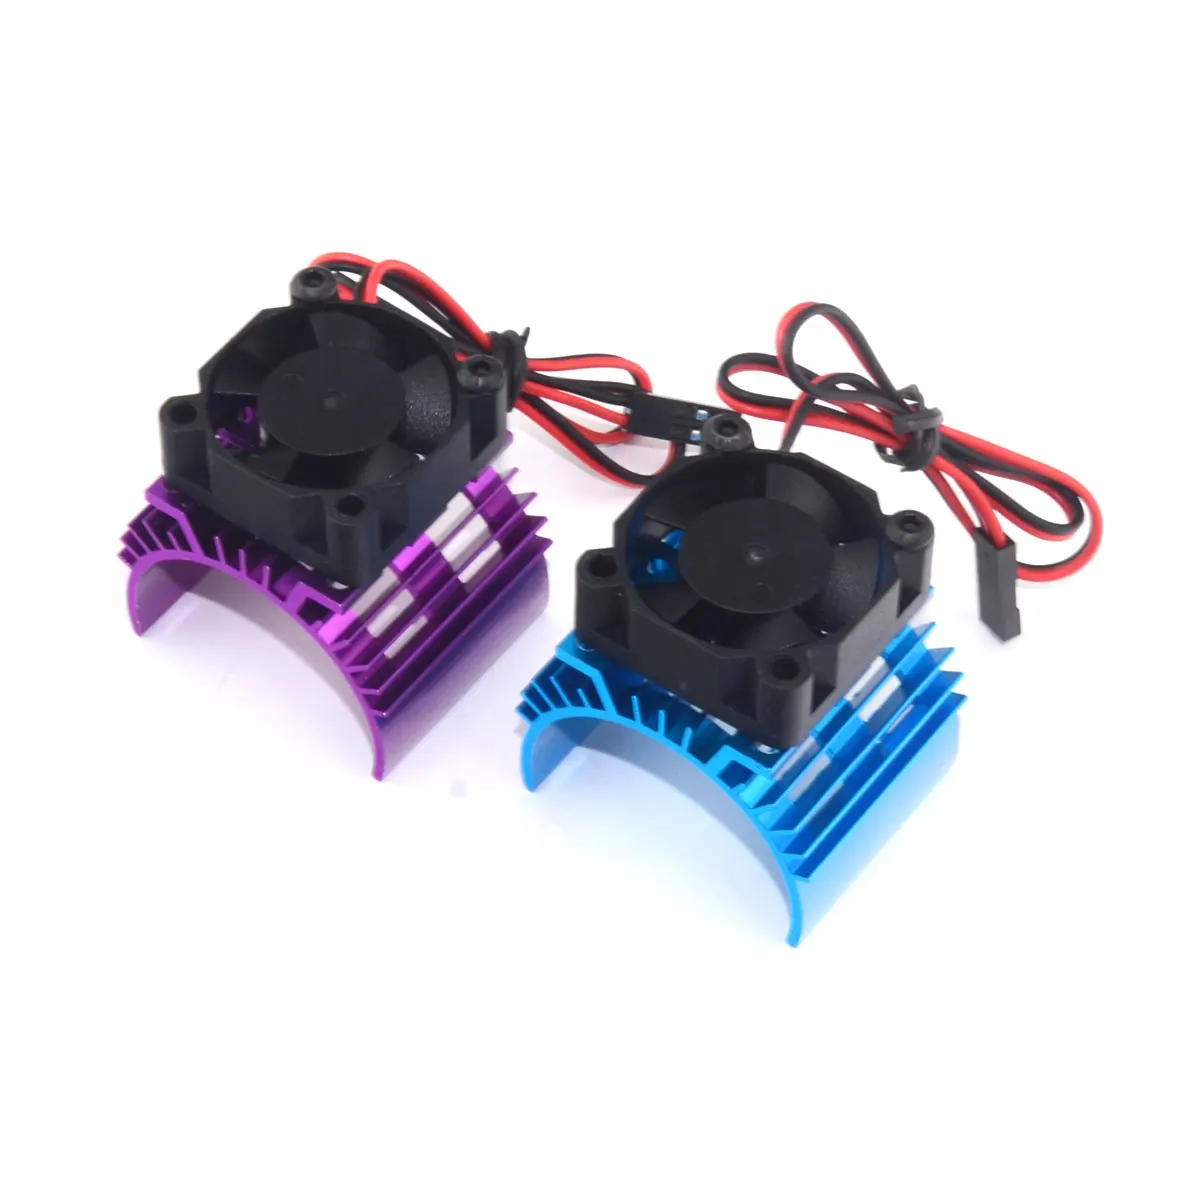 

RC Car Motor Heatsink Cover + Cooling Fan for 1/10 HSP RC Car 540 550 3650 Size 36mm Motor Heat Sin Electric Parts